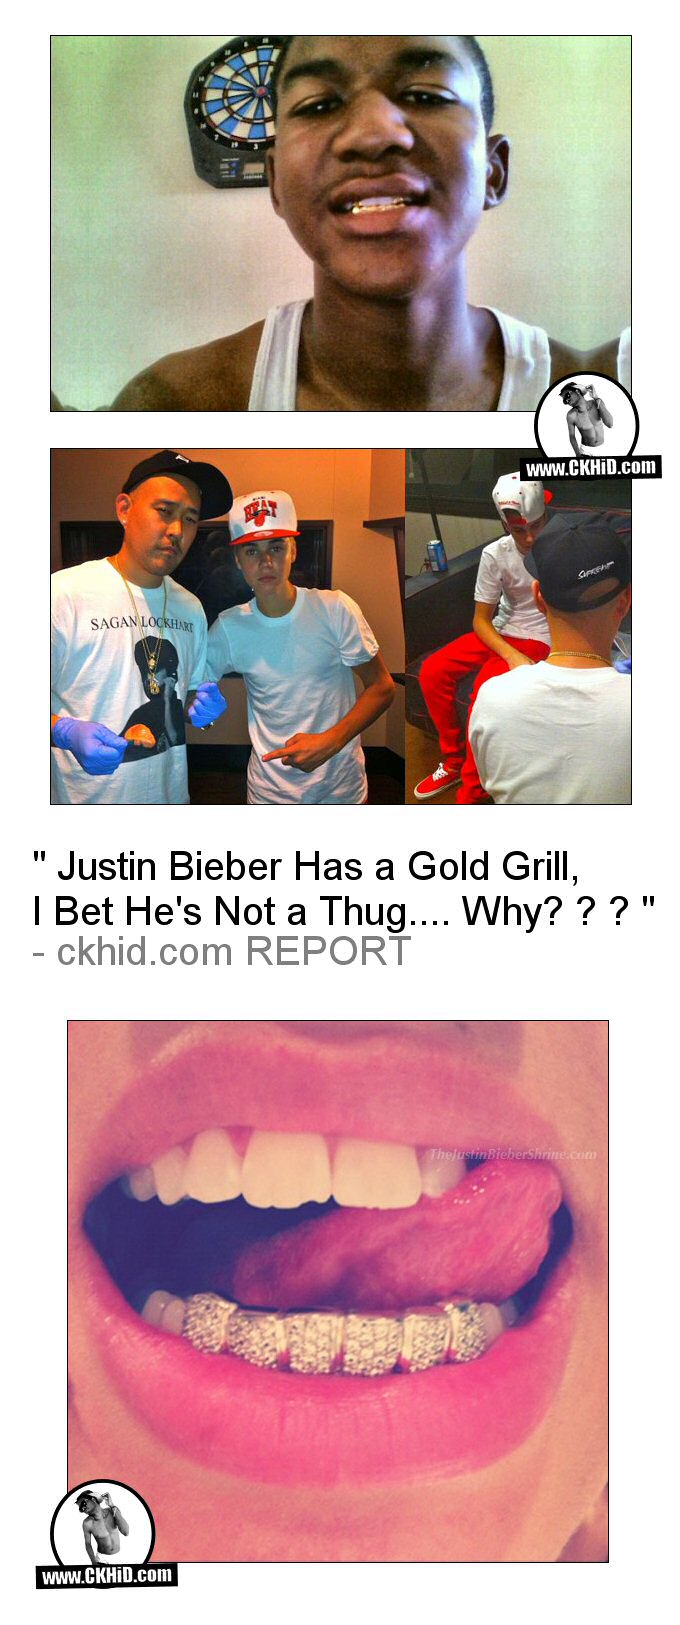 Trayvon Martin Gold Grill vs Justin Bieber Gold Grill .  Why is Only 1 a "Bad Boy" image?